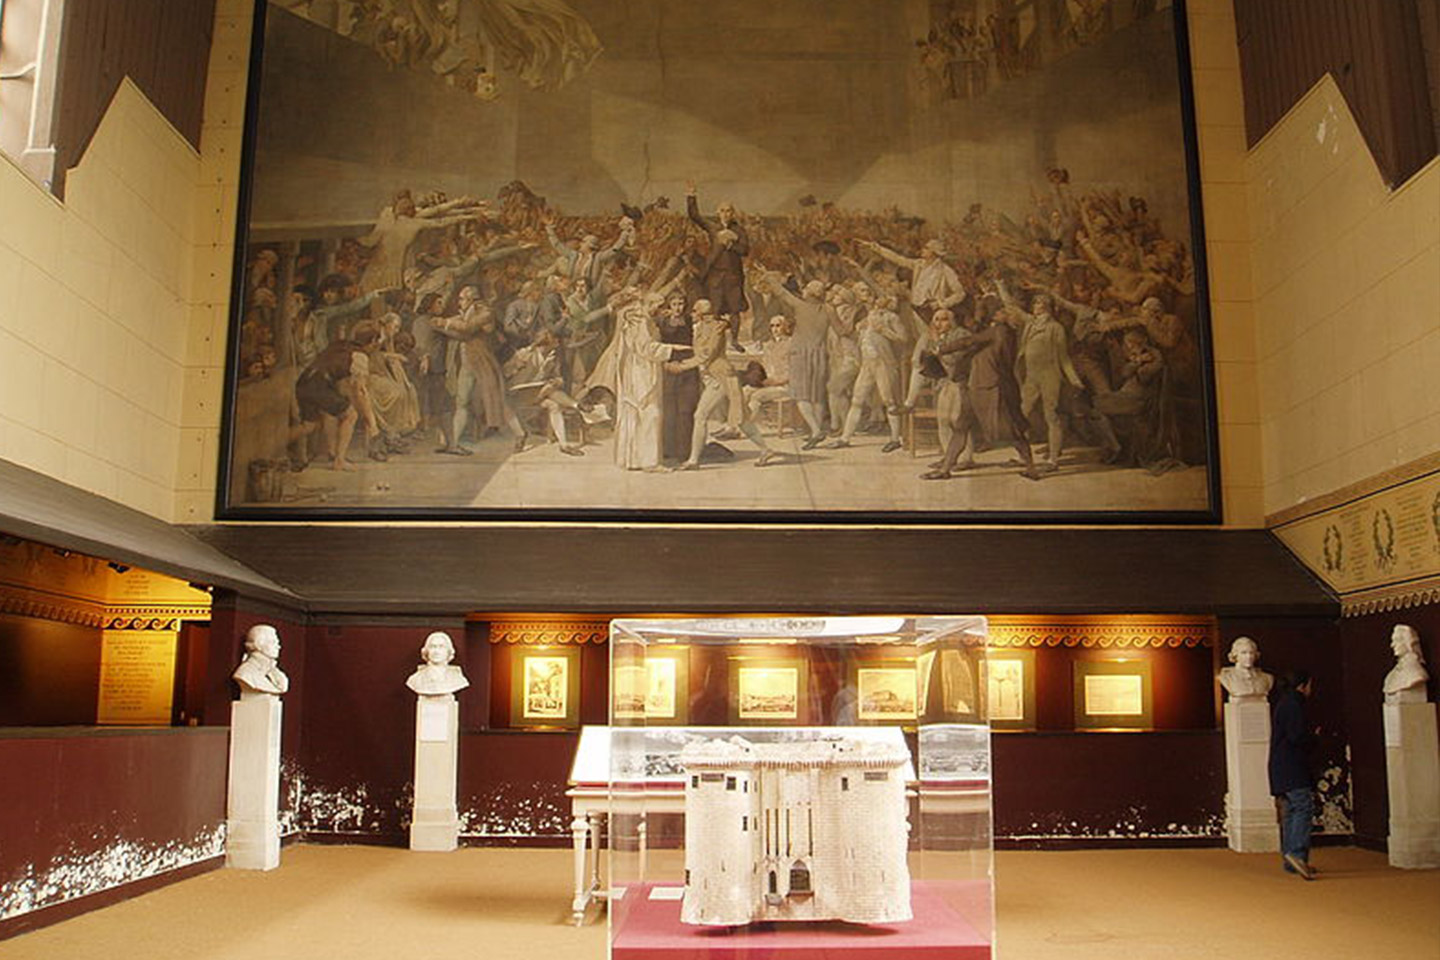 The french court at Versailles stock image